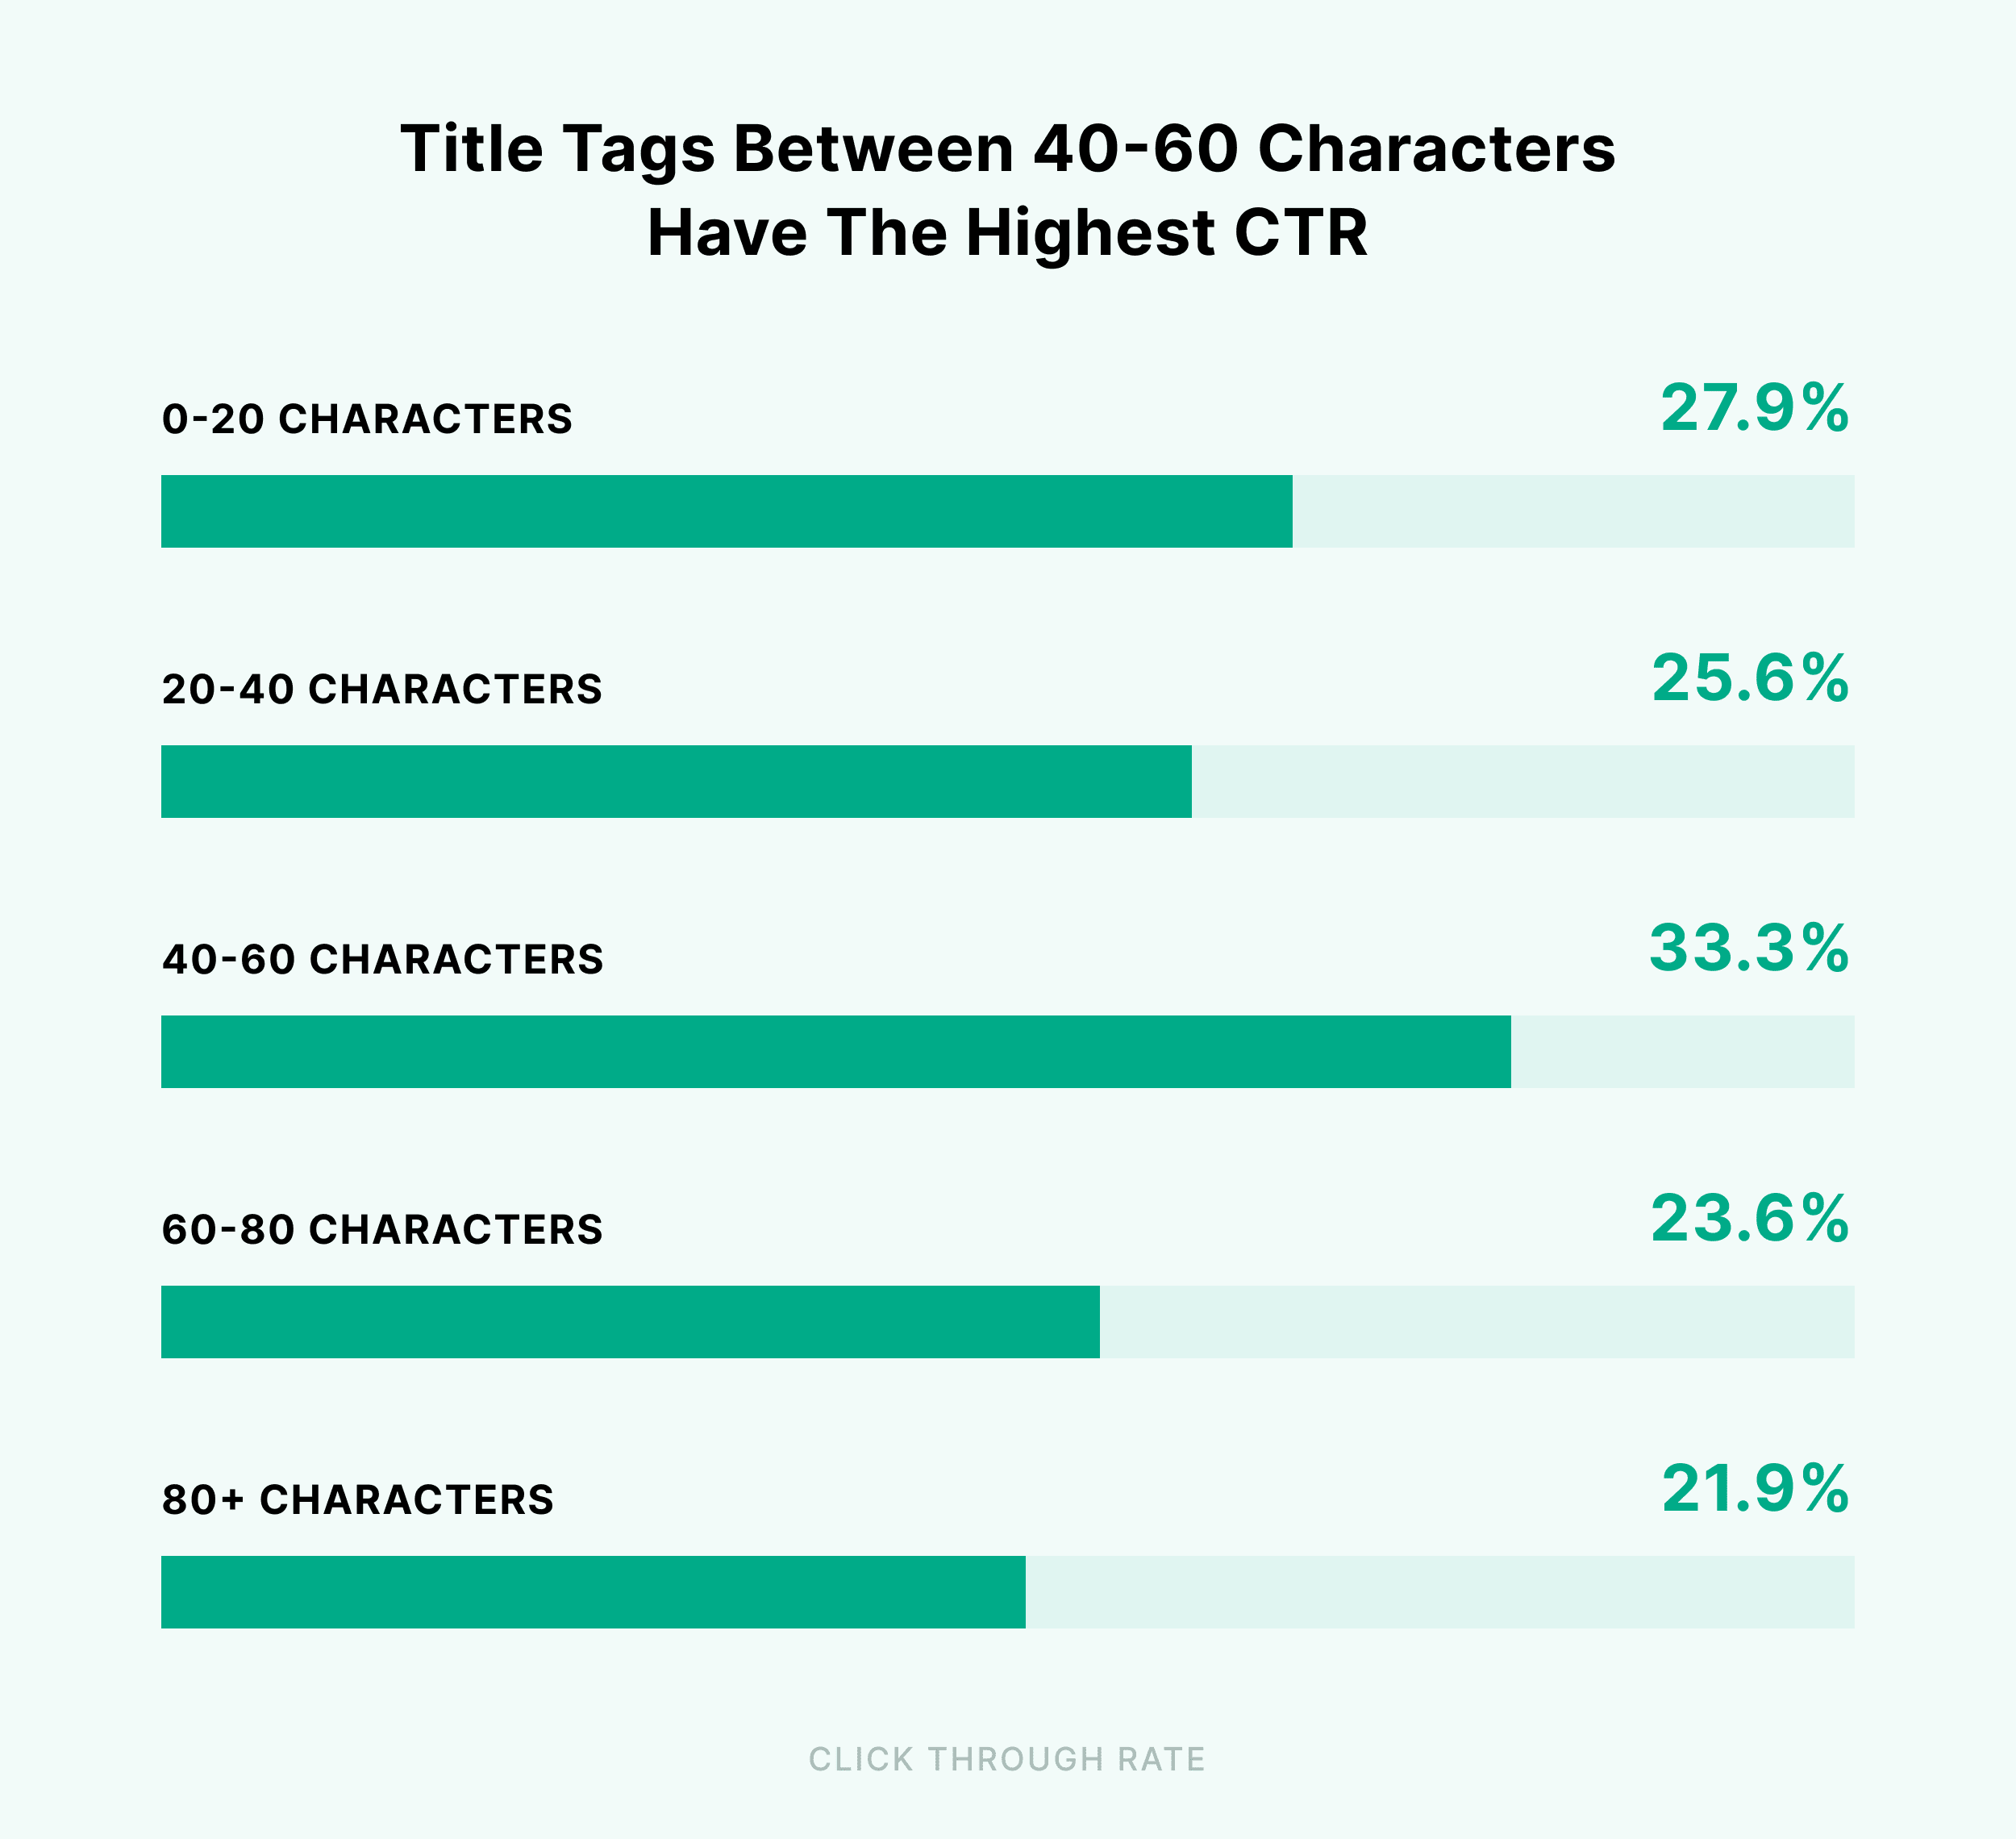 Title tags between 40 to 60 characters have the highest CTR